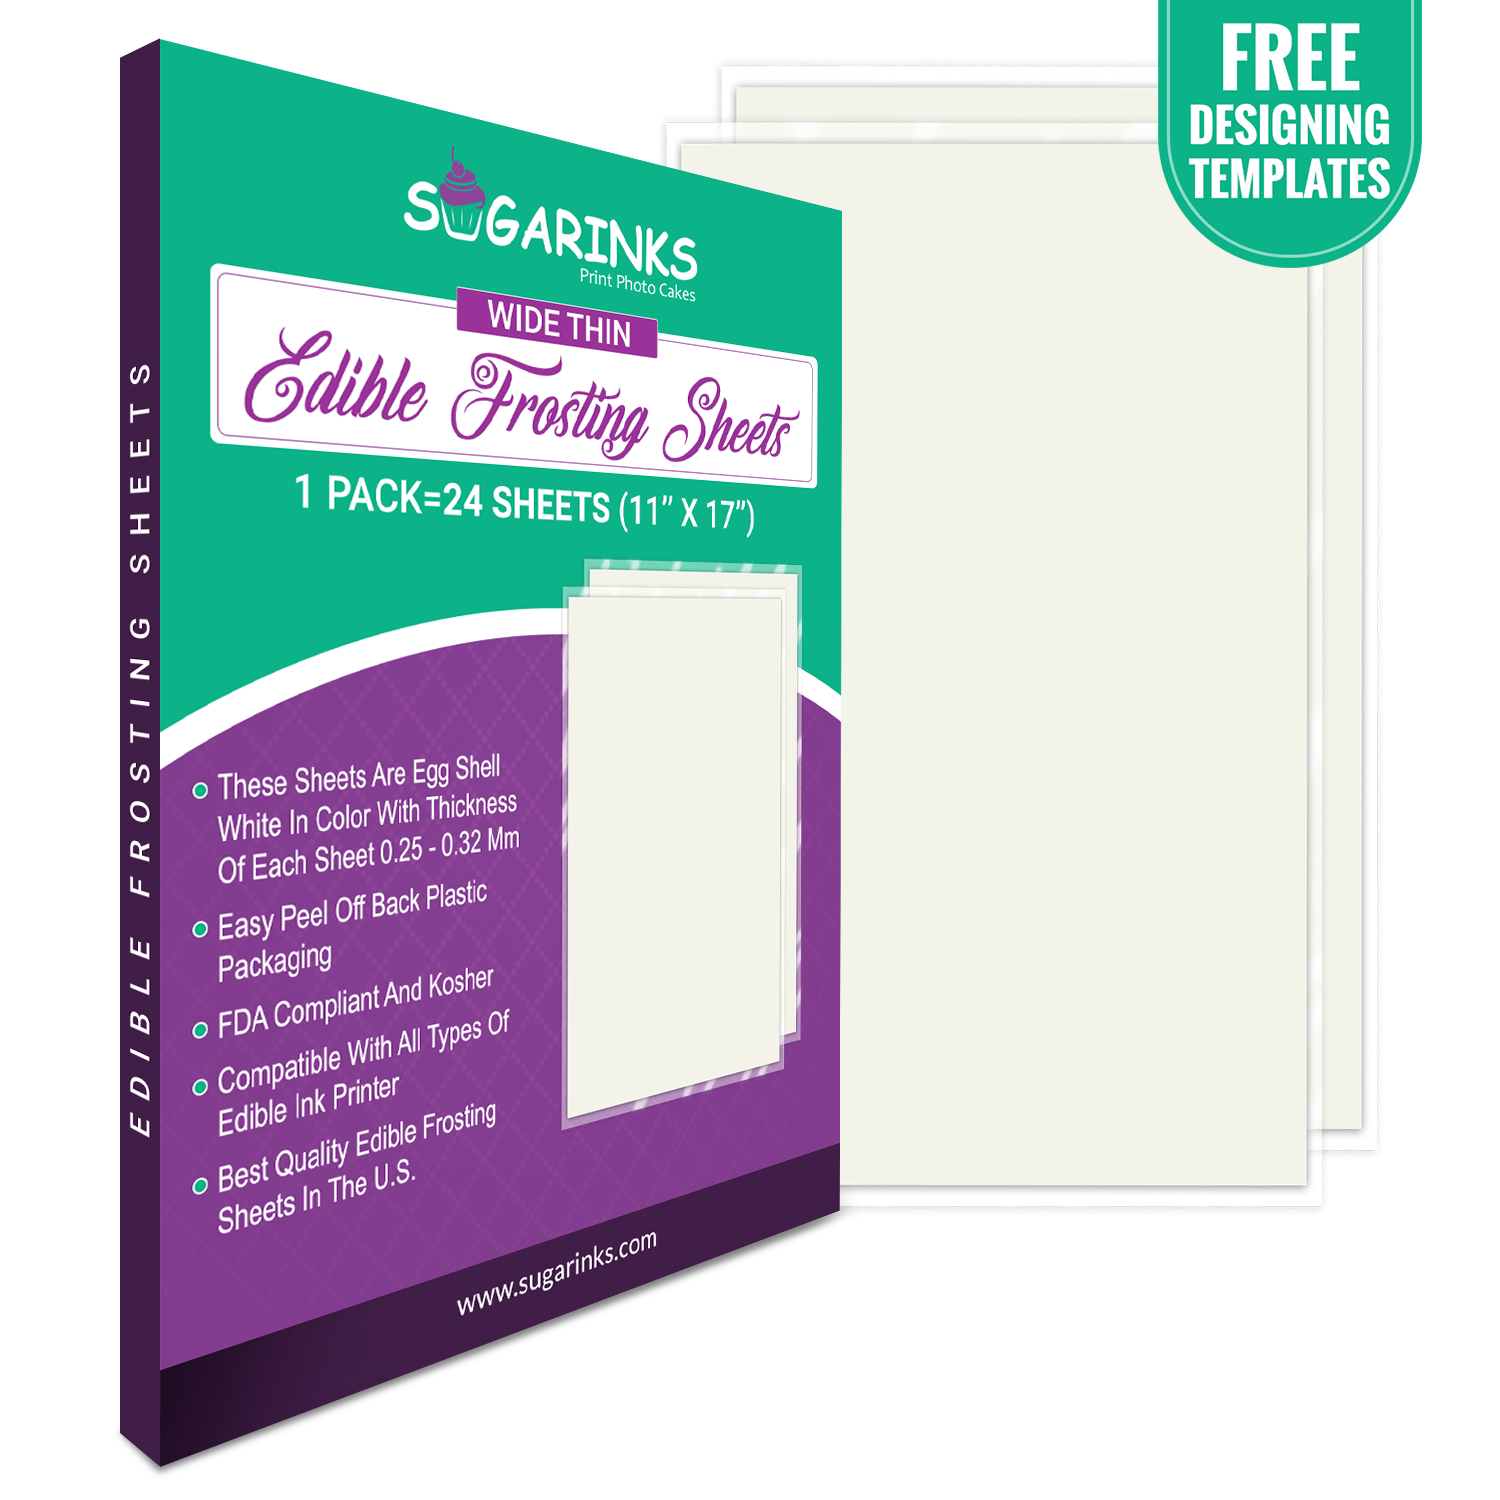 Sugarinks Premium Quality Wide Thin Frosting Sheets A4 Size (11”X17”) Pack of 24